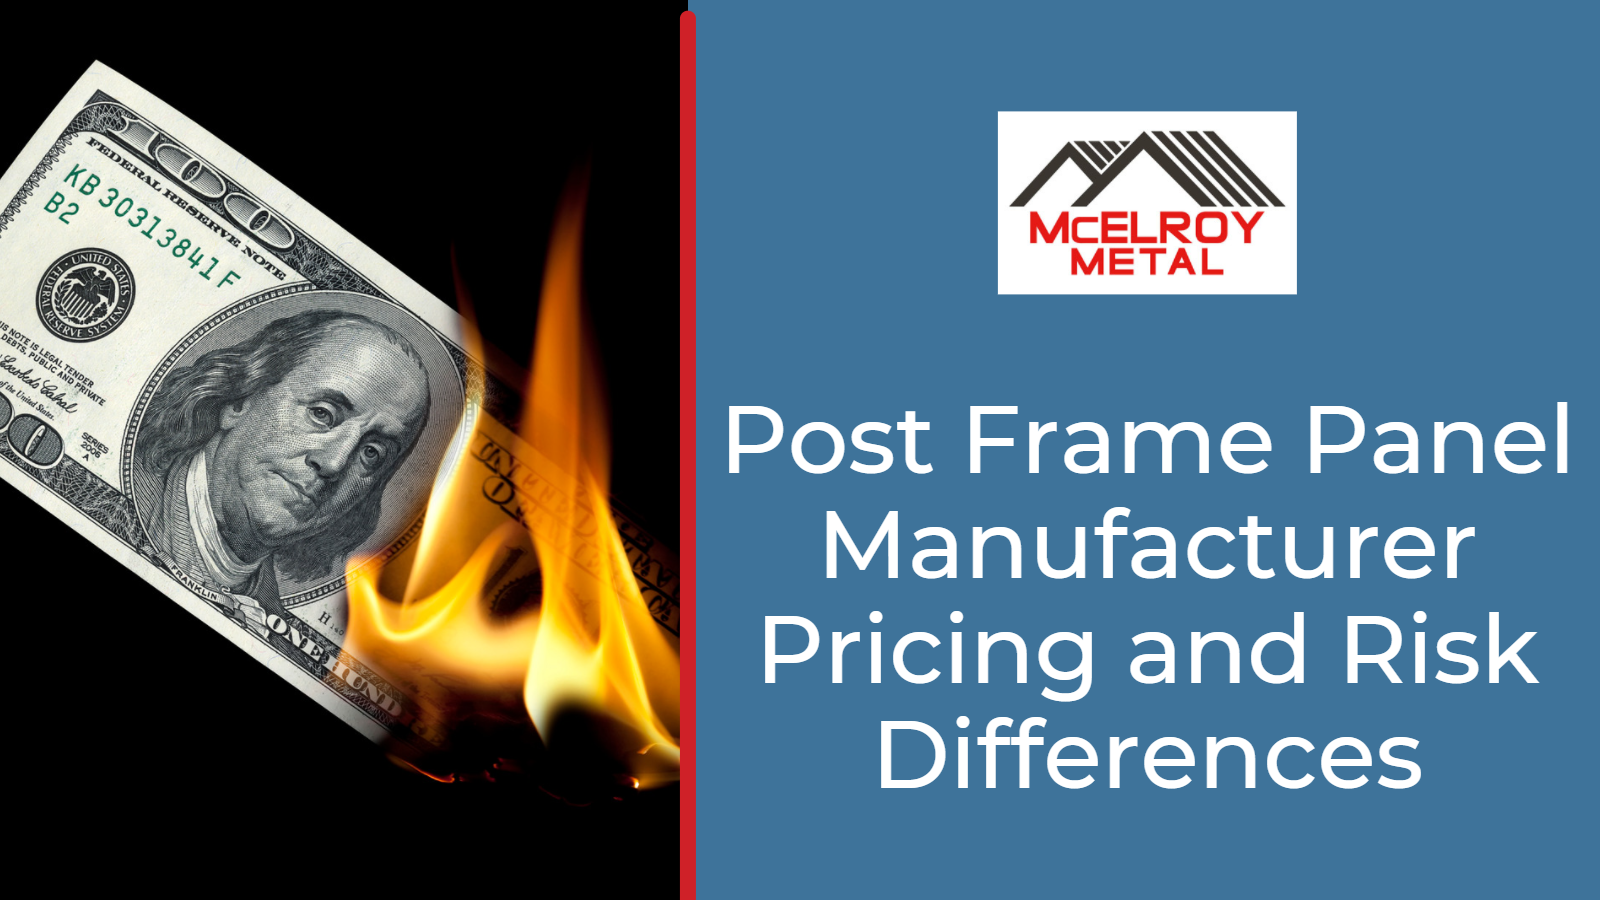 Post Frame Panel Manufacturer Pricing and Risk Differences